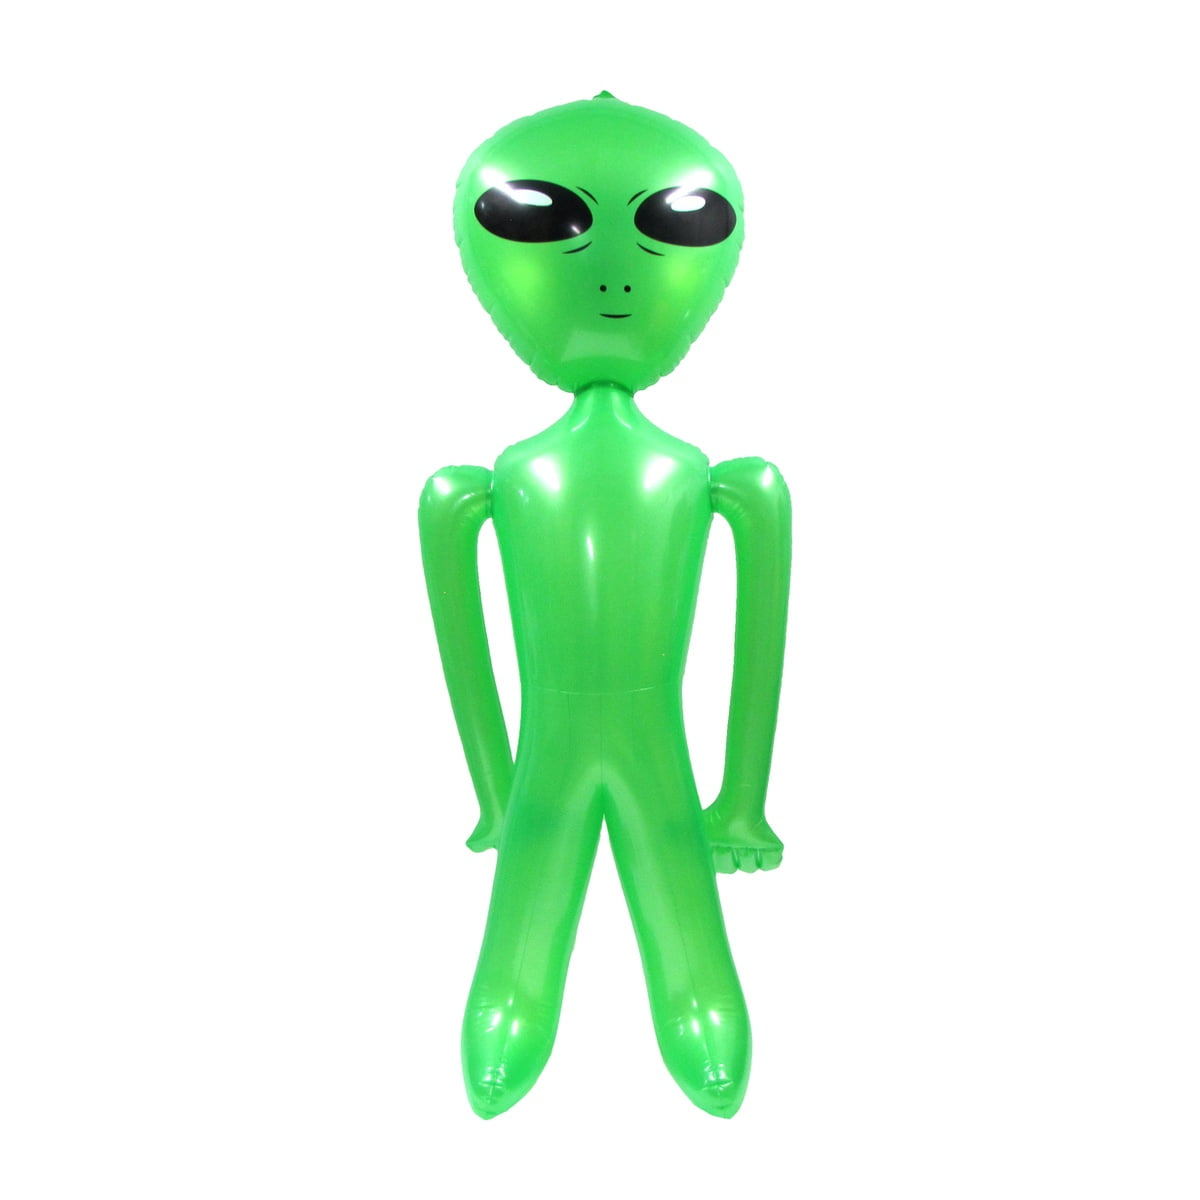 6 NEW INFLATABLE GREEN SPACE ALIENS 60" BLOW UP INFLATE ALIEN HALLOWEEN PARTY 